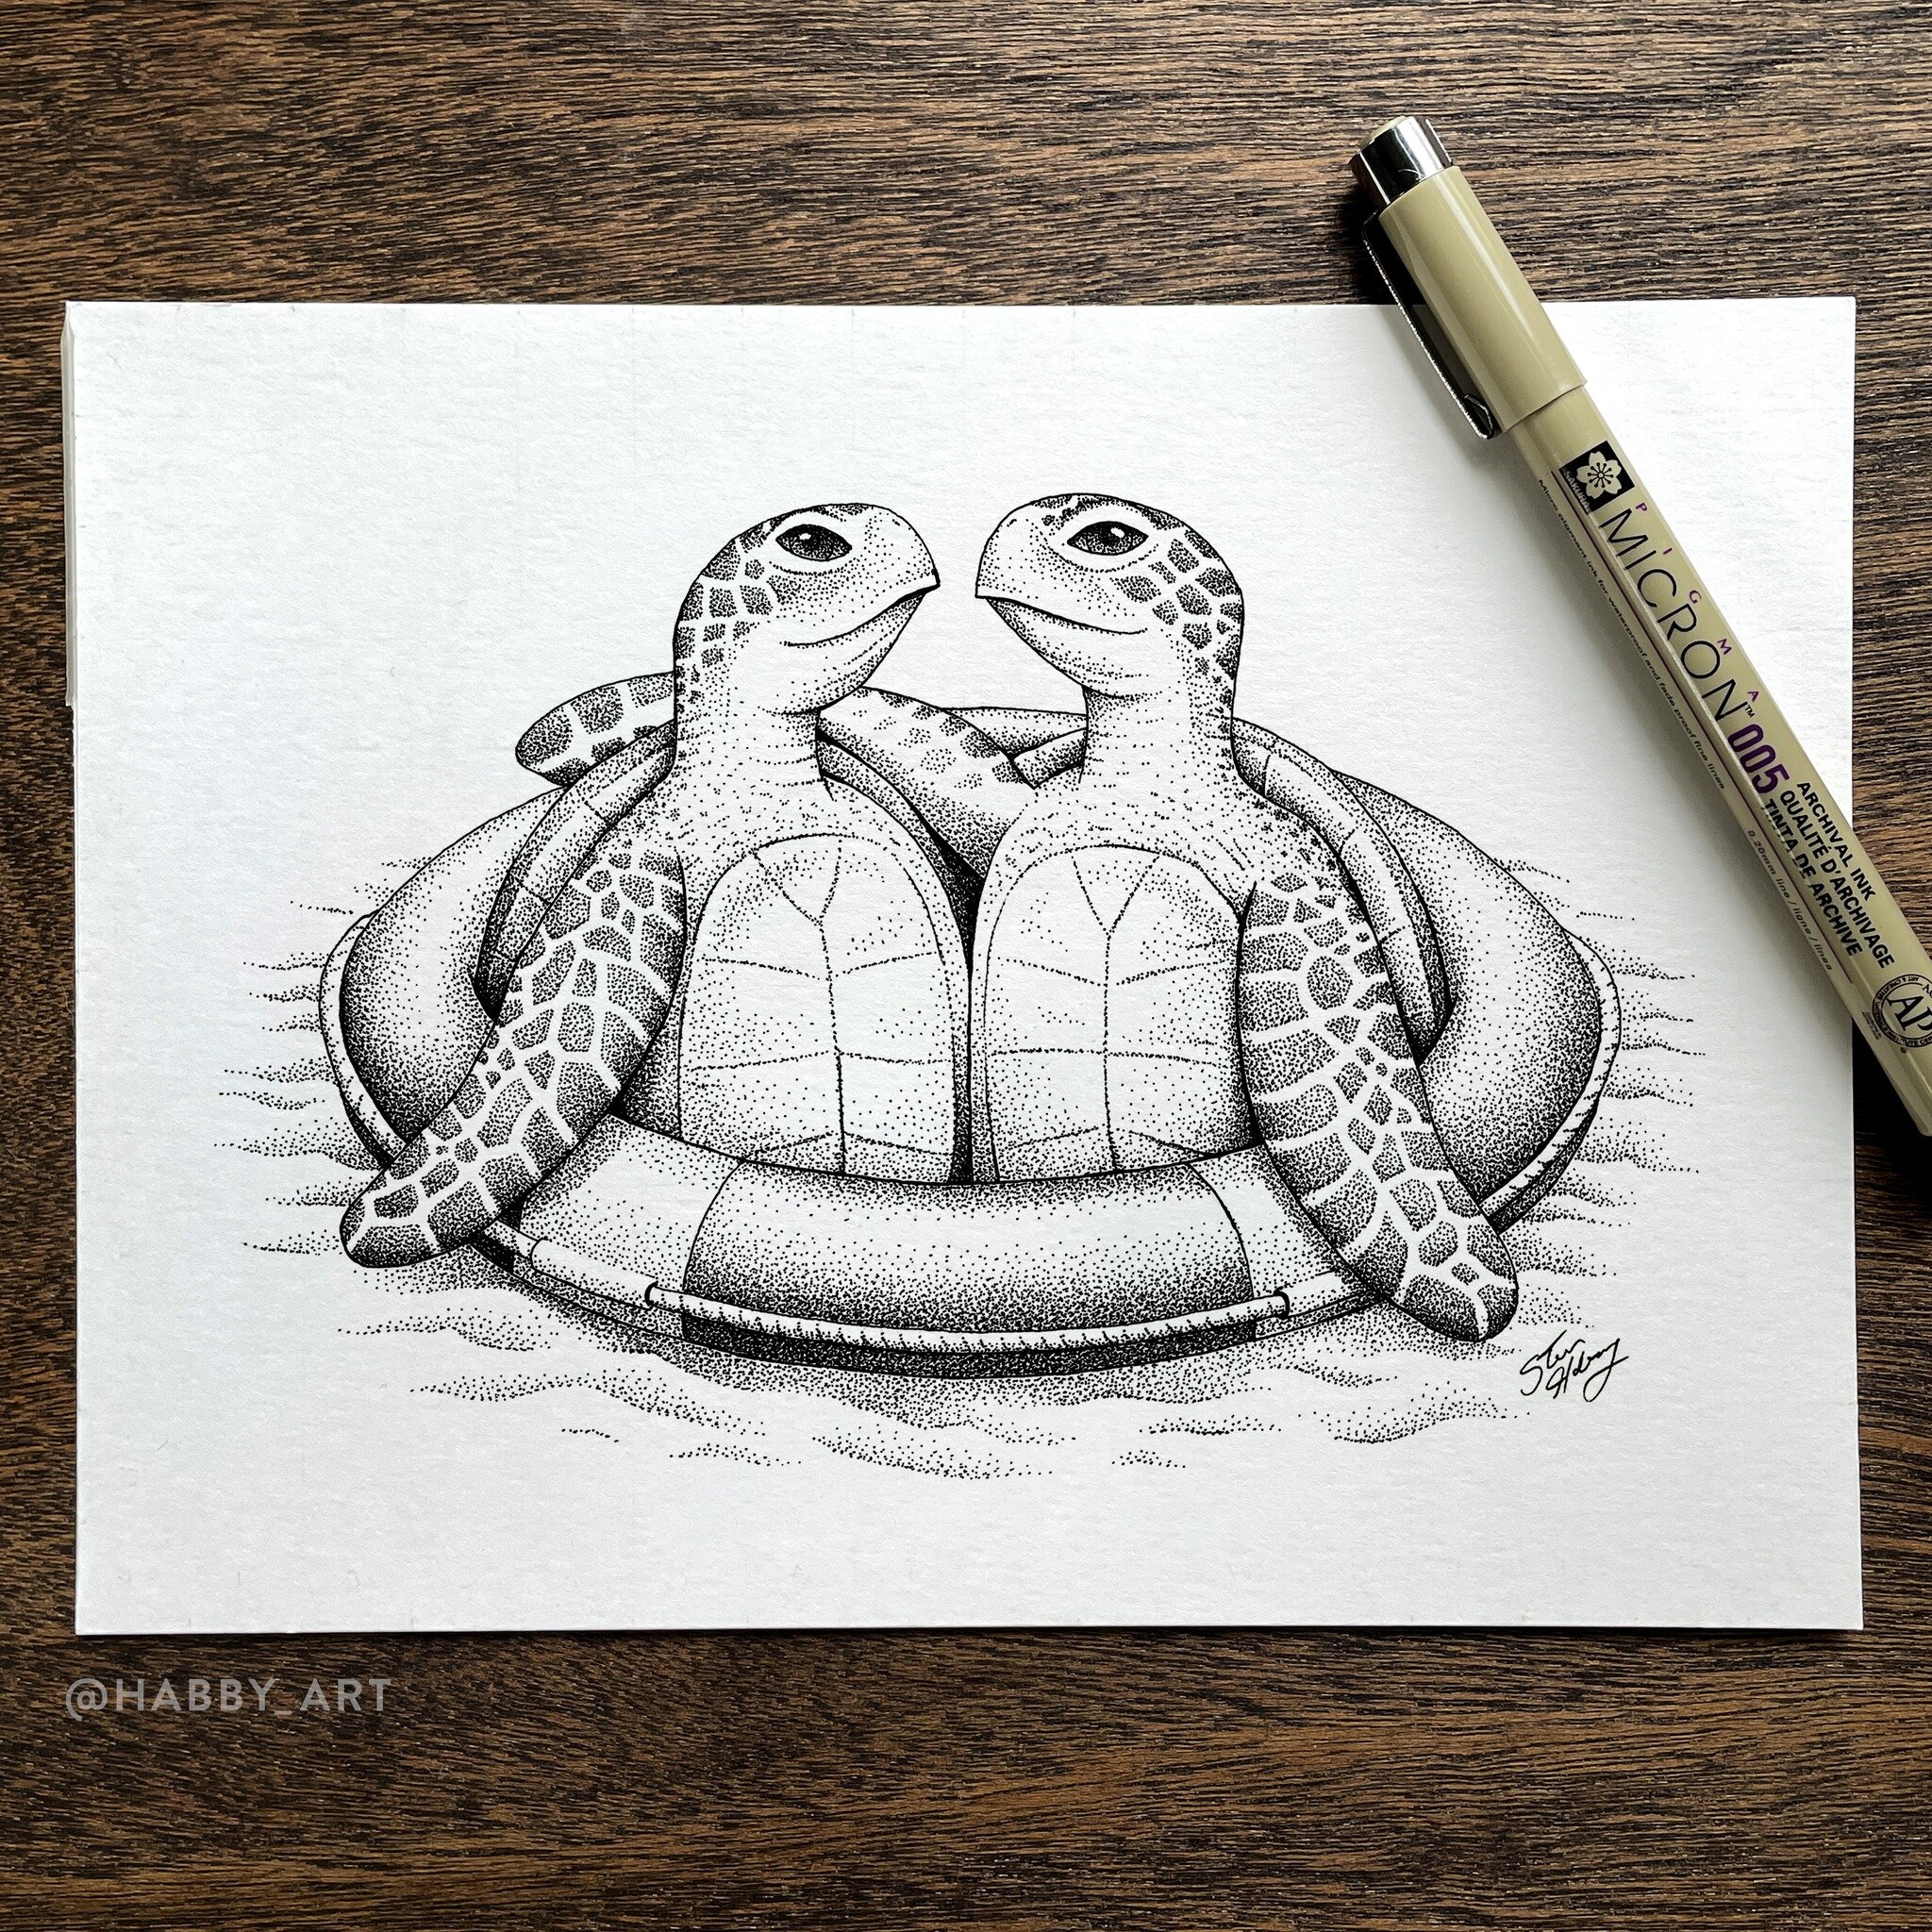 Finished ink drawing for a lovely couple who met while saving sea turtles. I personally have been wanting to draw sea turtles for some time now after bumping into them while surfing in Hawaii. They were so friendly and would swim right up to you! 🐢?